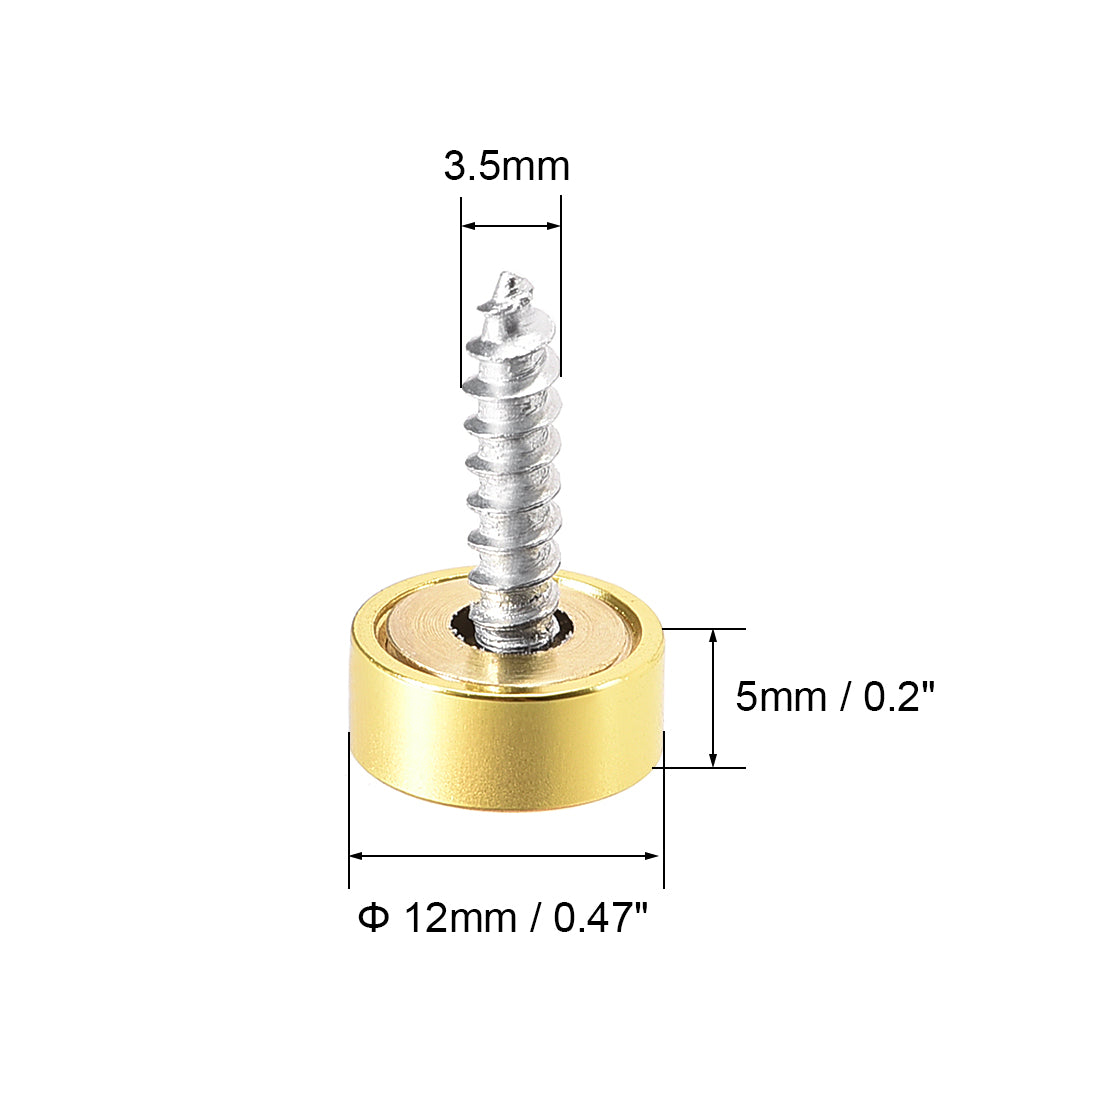 uxcell Uxcell Mirror Screws, Decorative Cap Fasteners Cover Nails, Electroplated, Bright Golden 12mm/0.47" Brass 12pcs